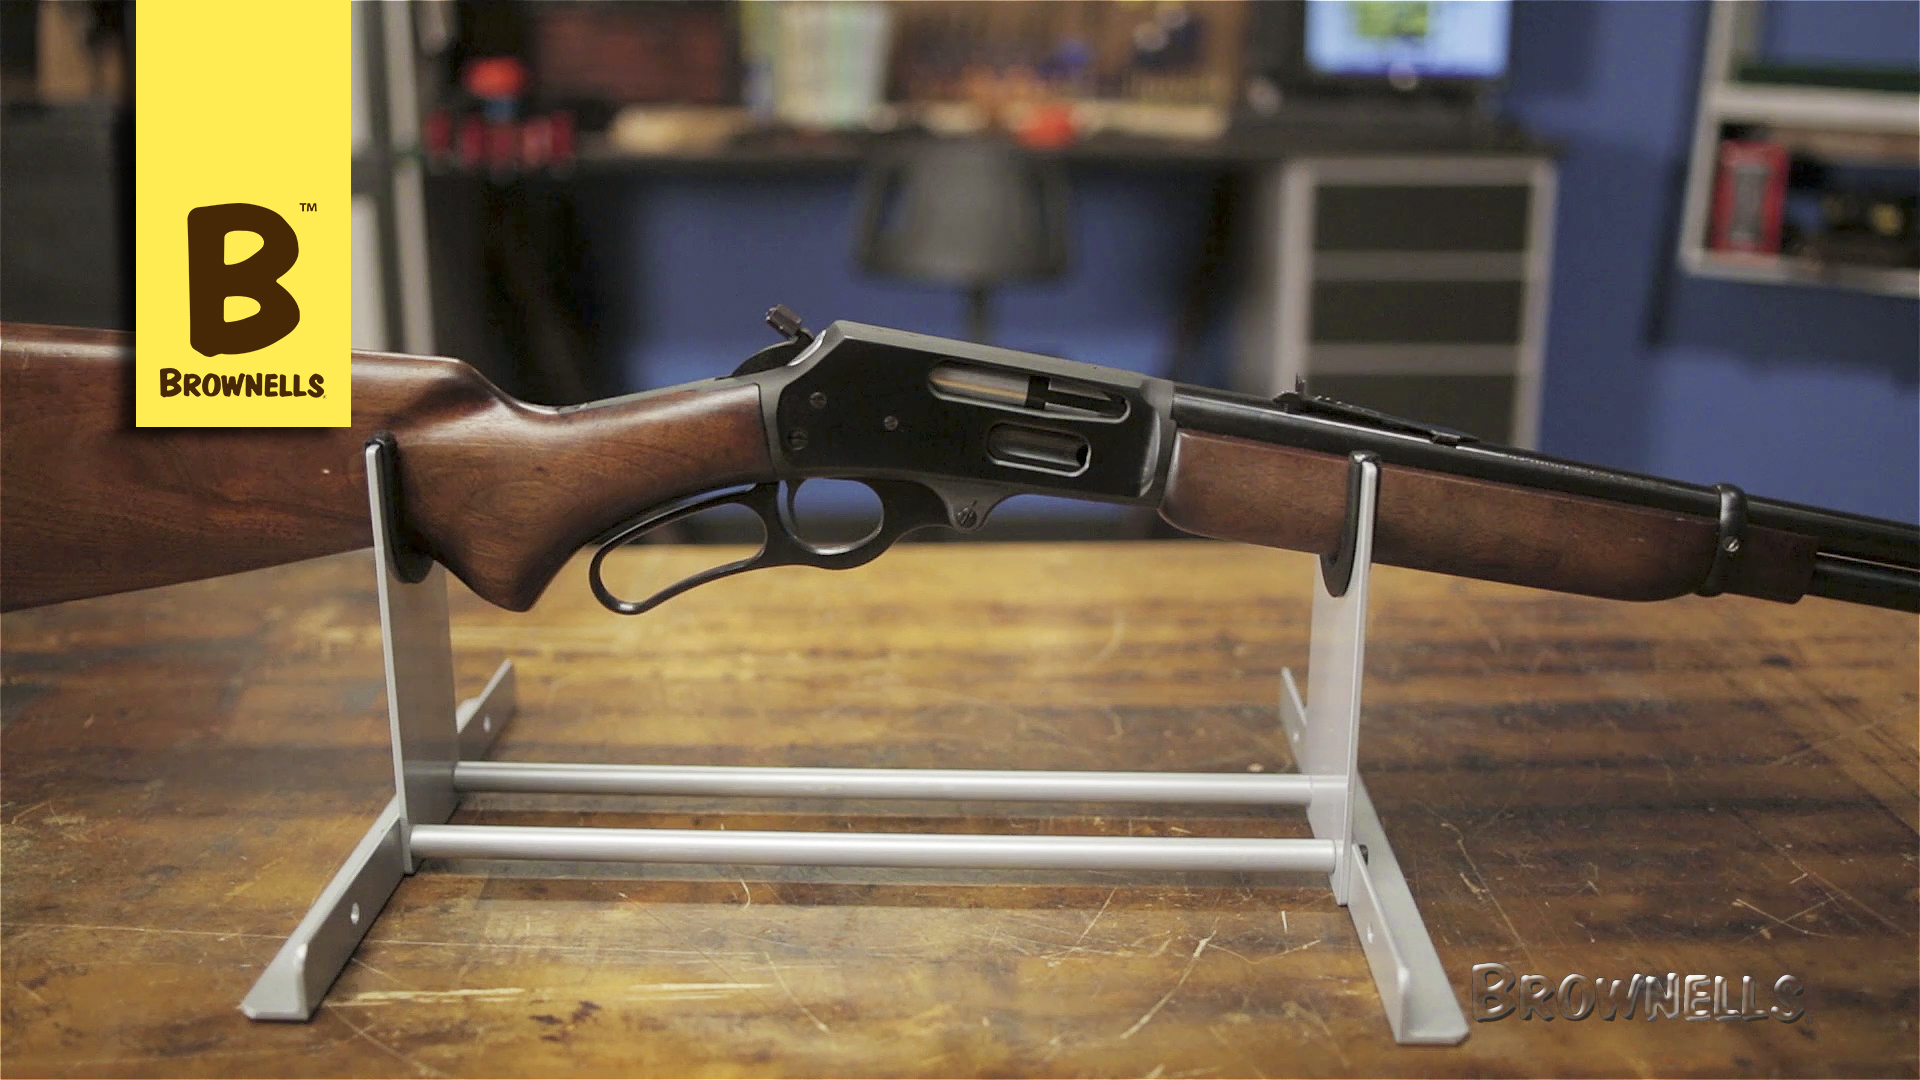 Firearm Maintenance Series: Marlin 336 Lever Action Reassembly, Part 4/4